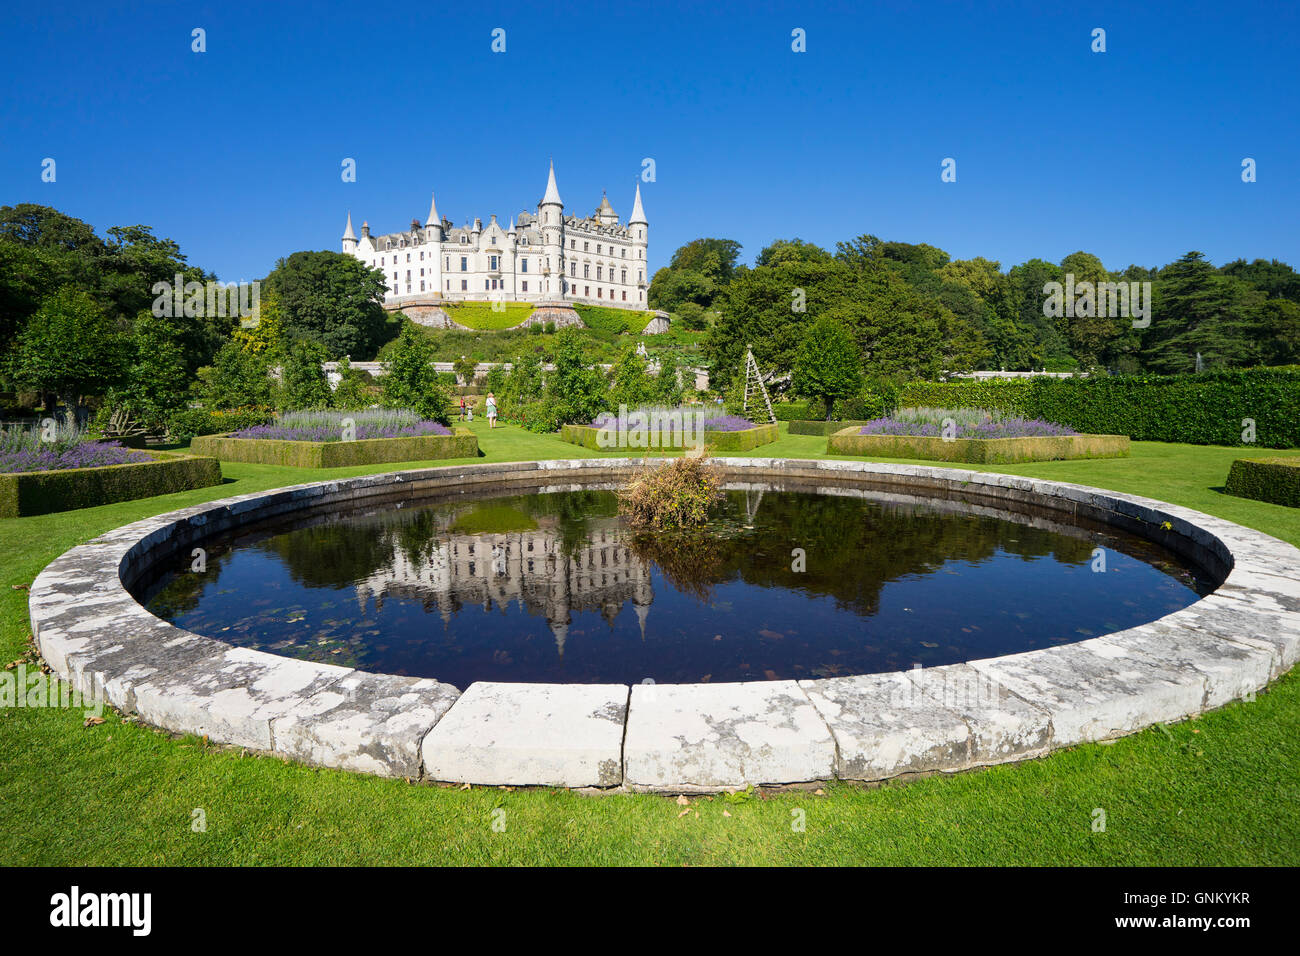 Dunrobin Castle with pond and gardens at Golspie, Highland, Scotland. Castle is seat of the Earl of Sutherland and the Clan Suth Stock Photo